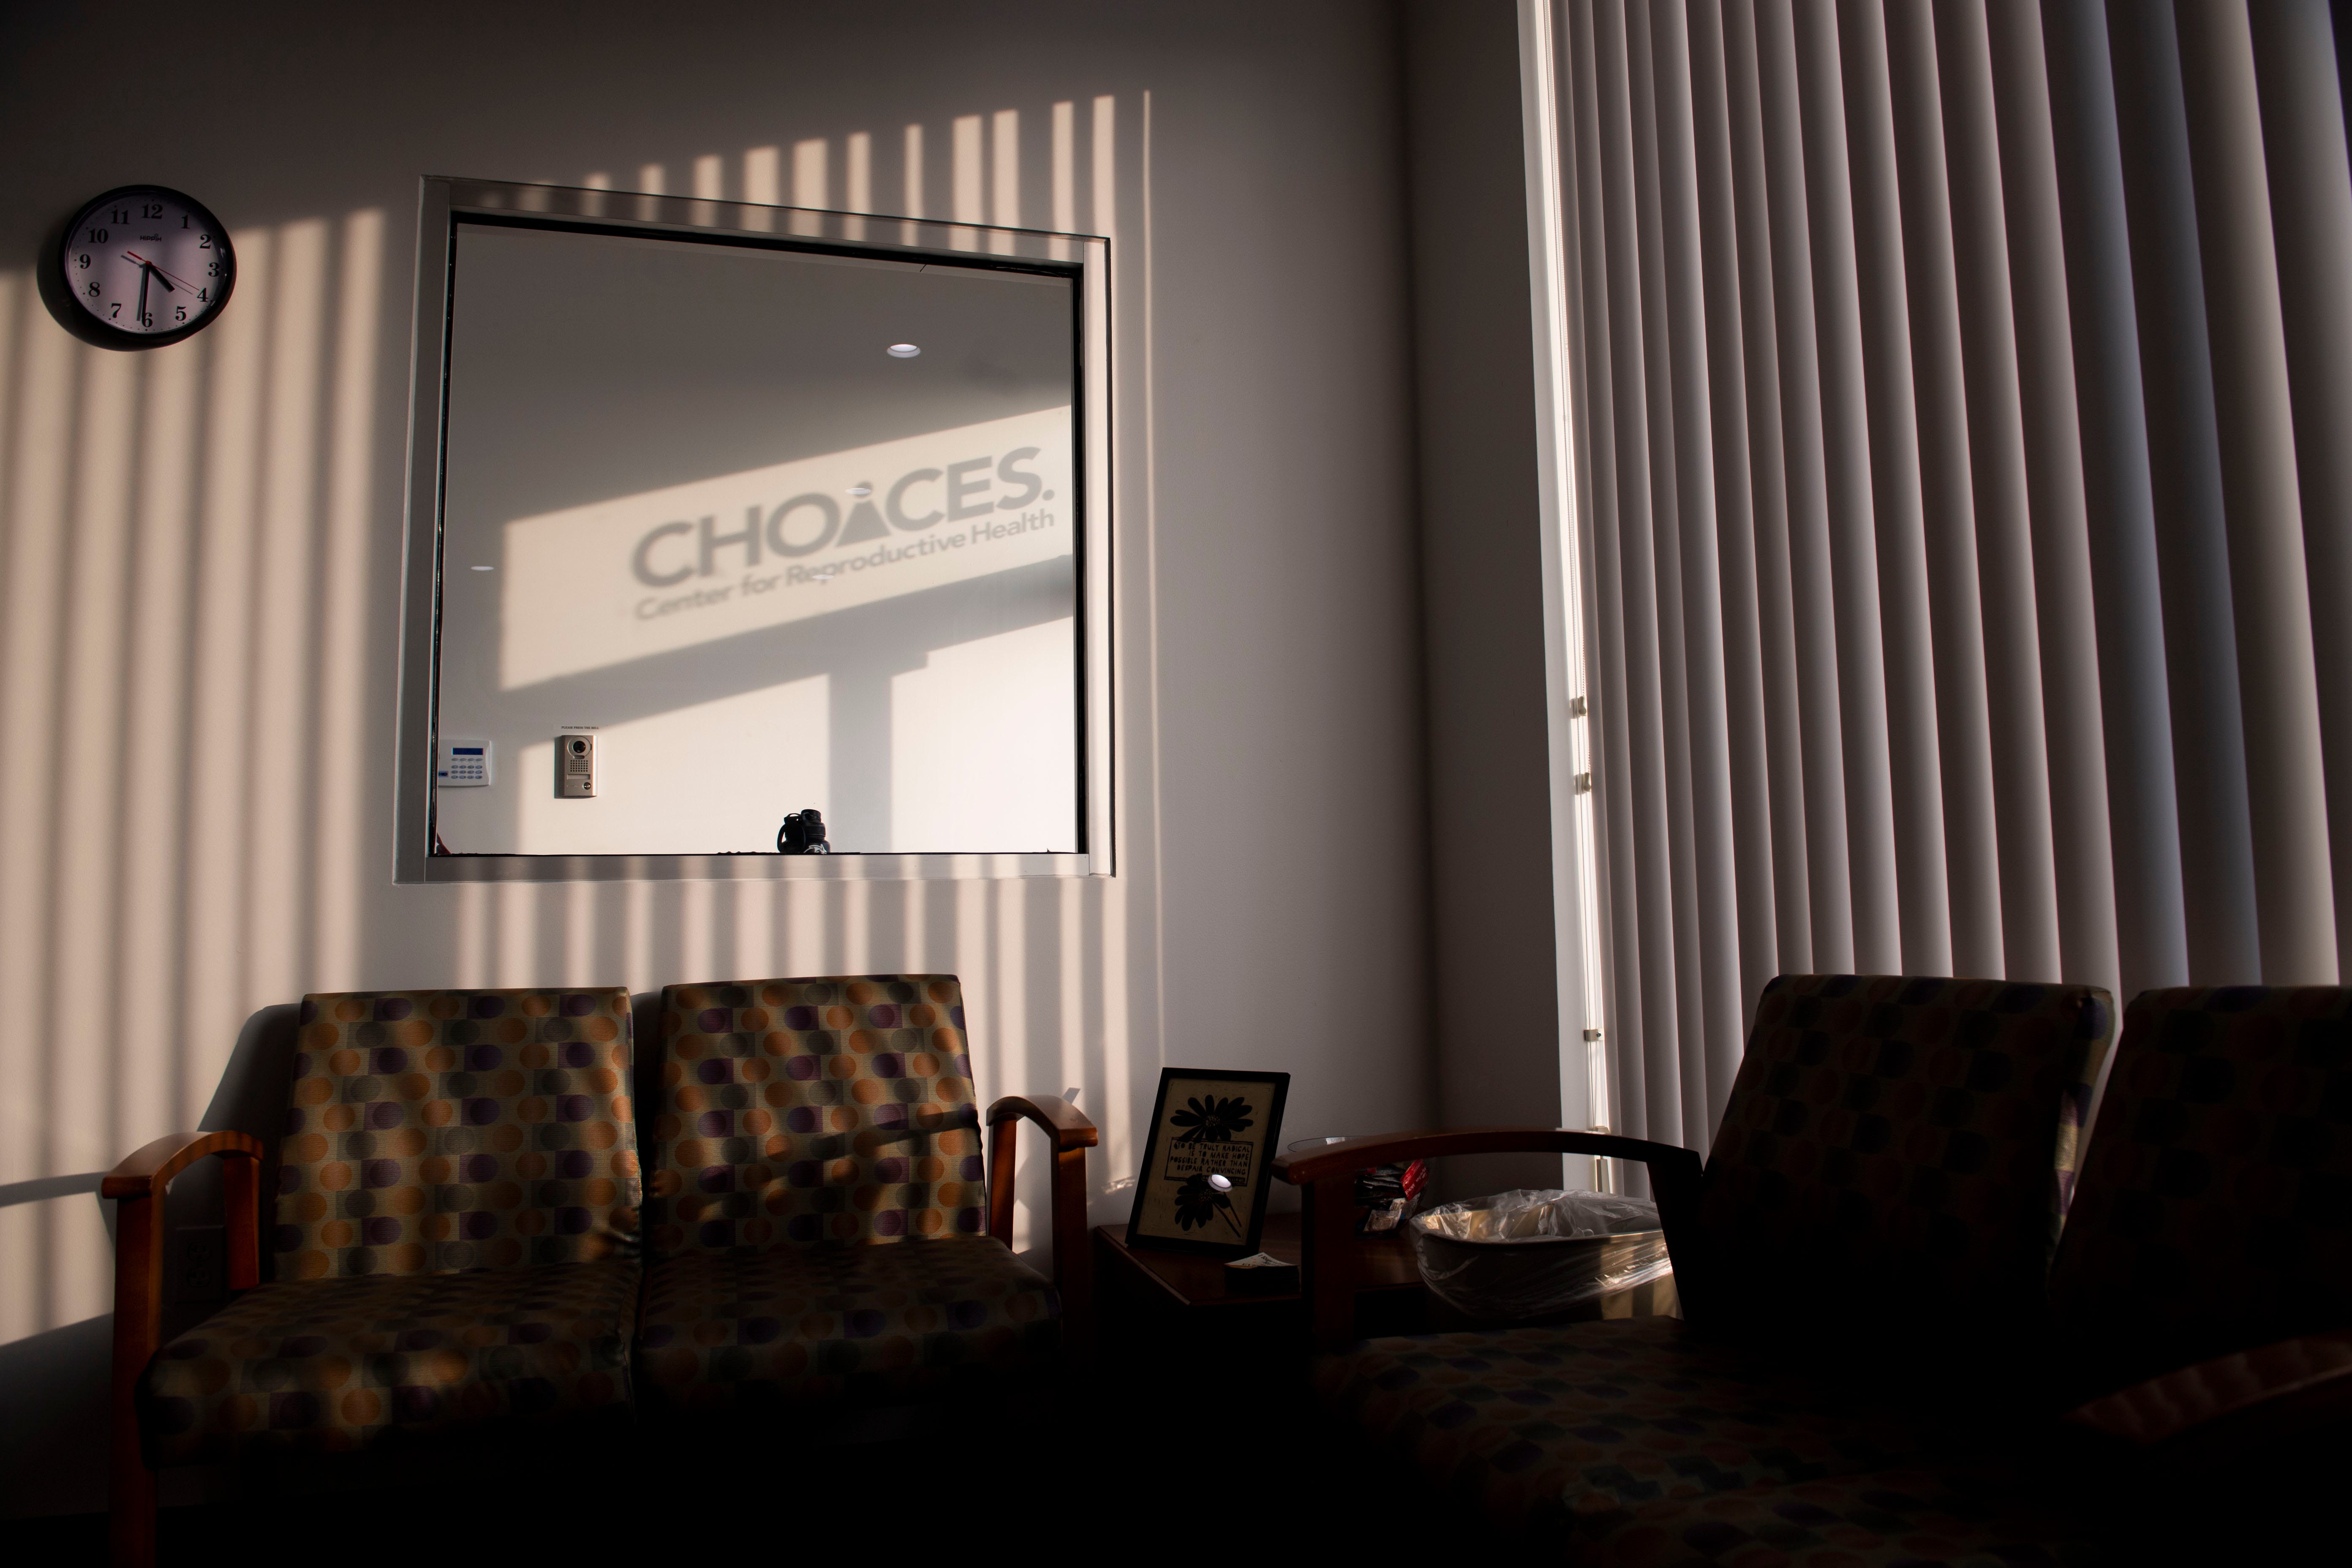 CHOICES Center for Reproductive Health  in Carbondale, Ill.